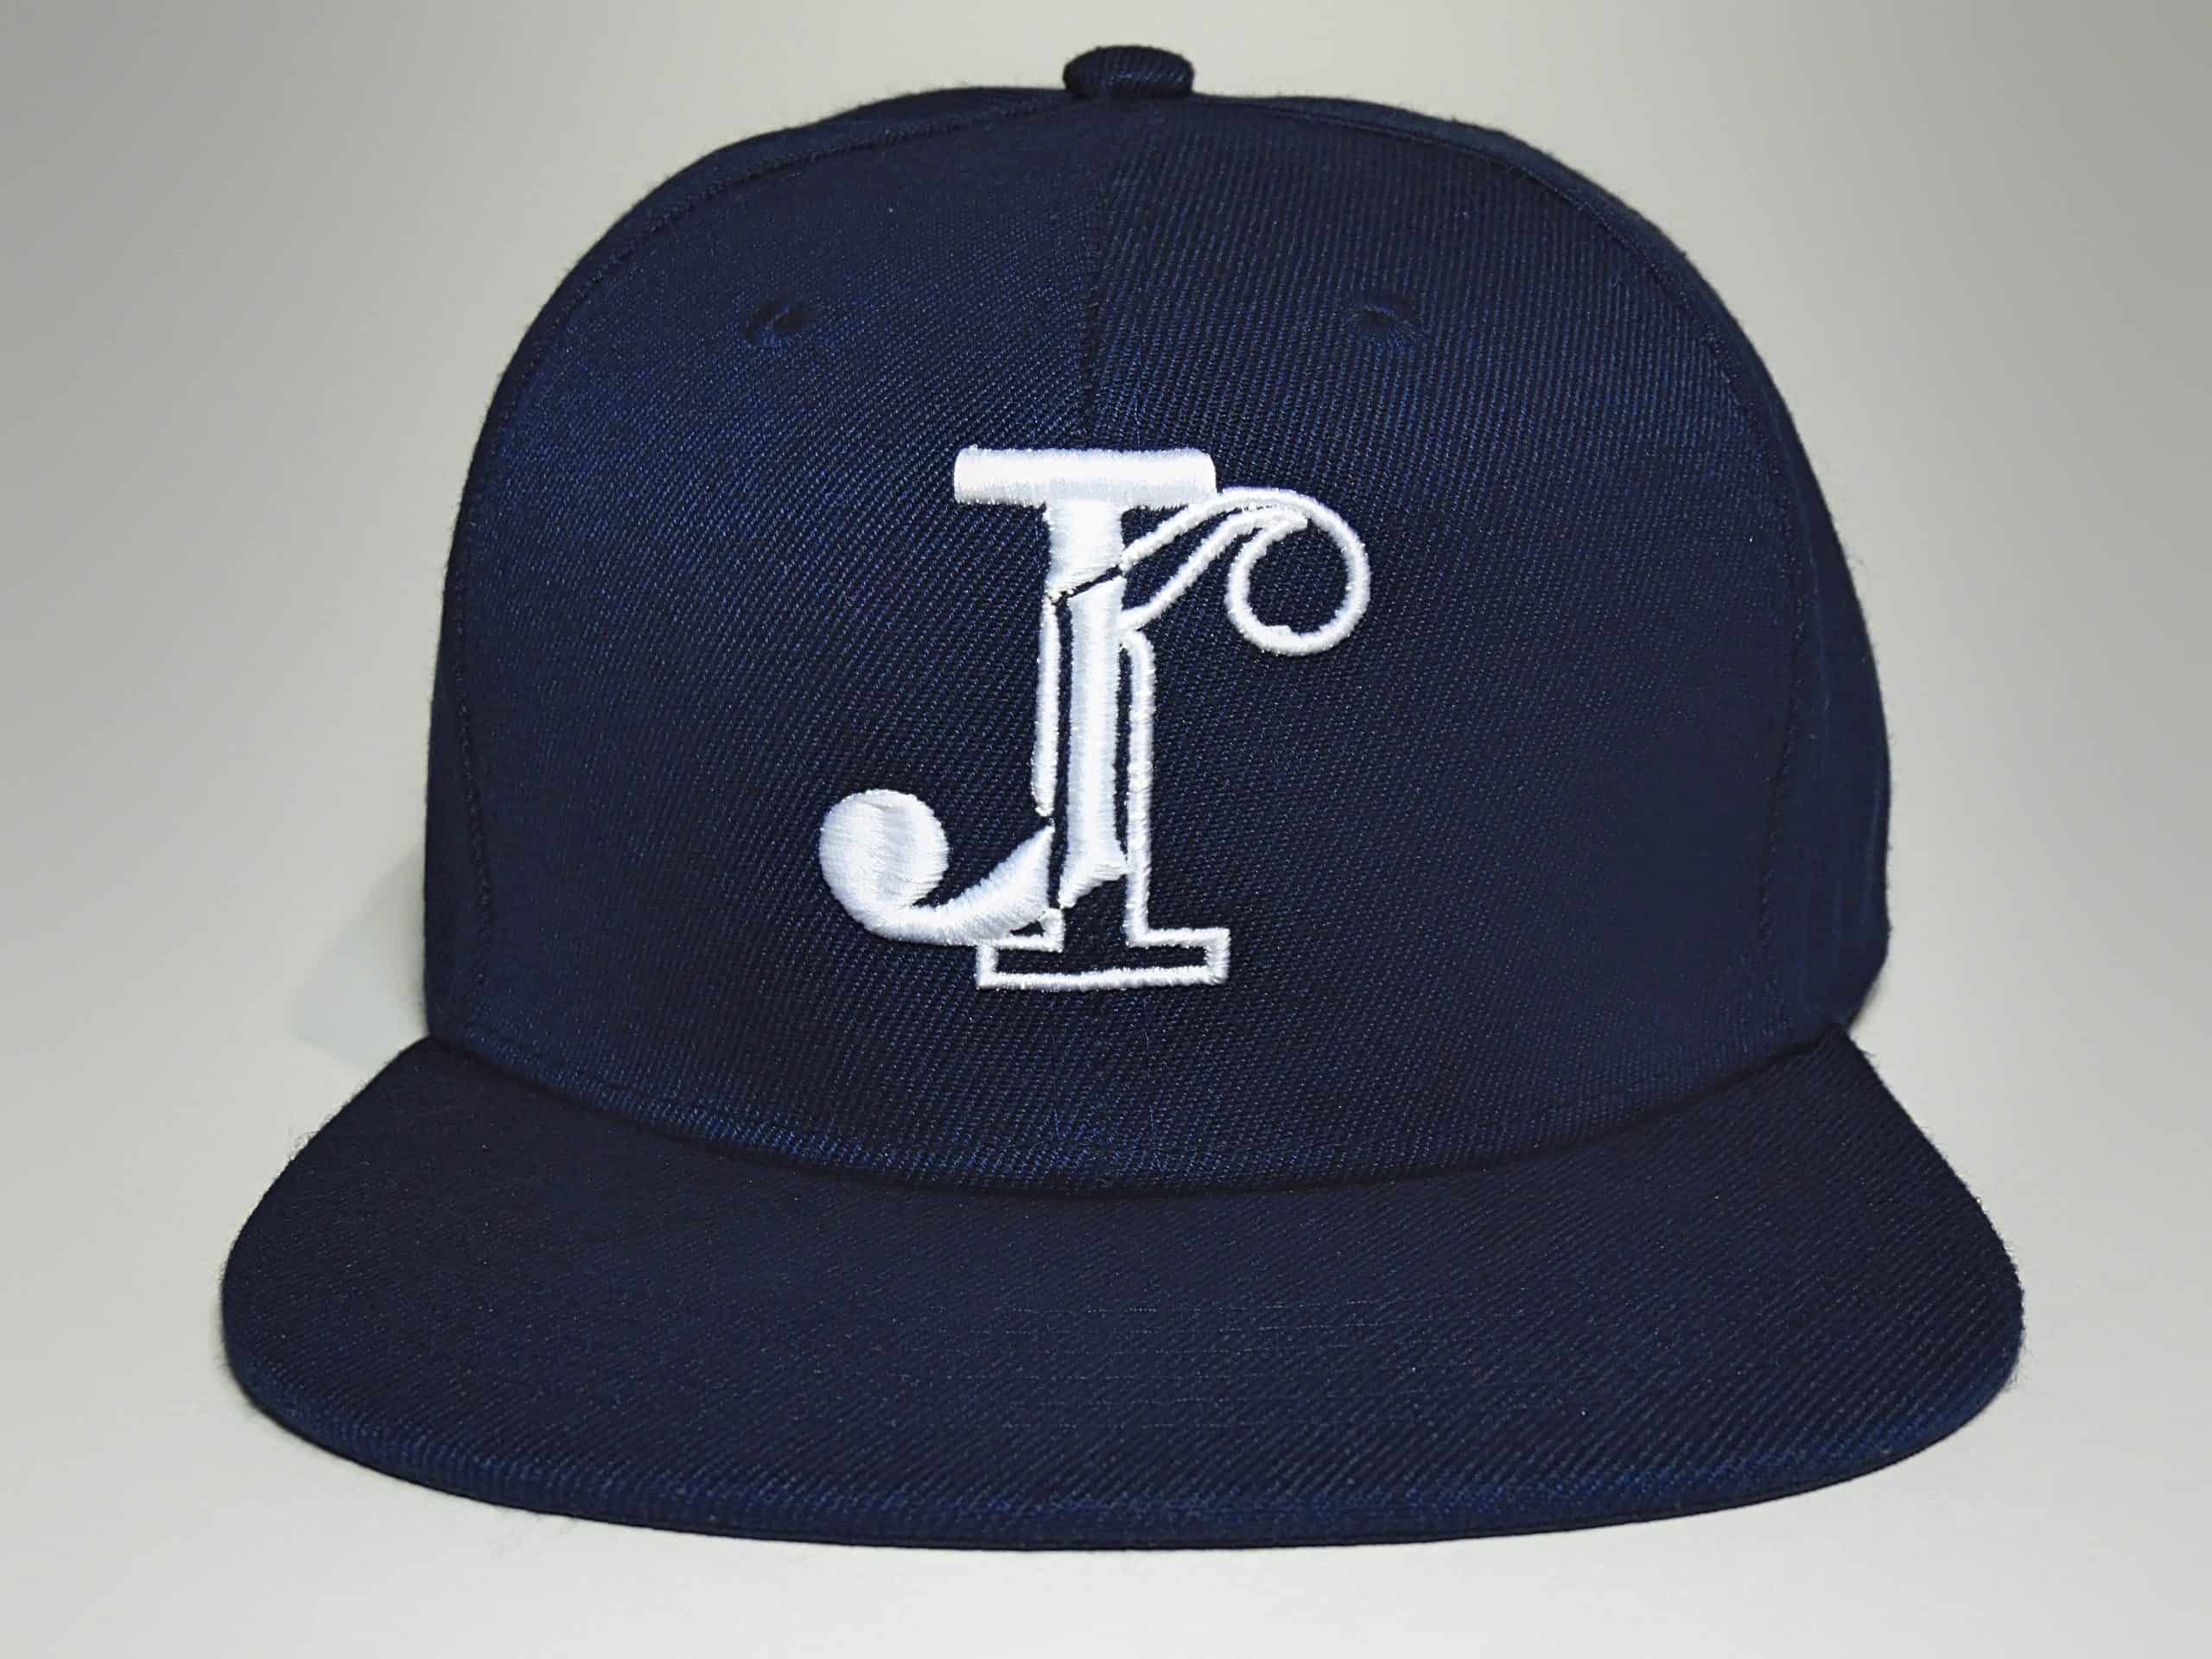 Jean-Jacques Navy Blue Baseball with Snapback White lettering, Cap